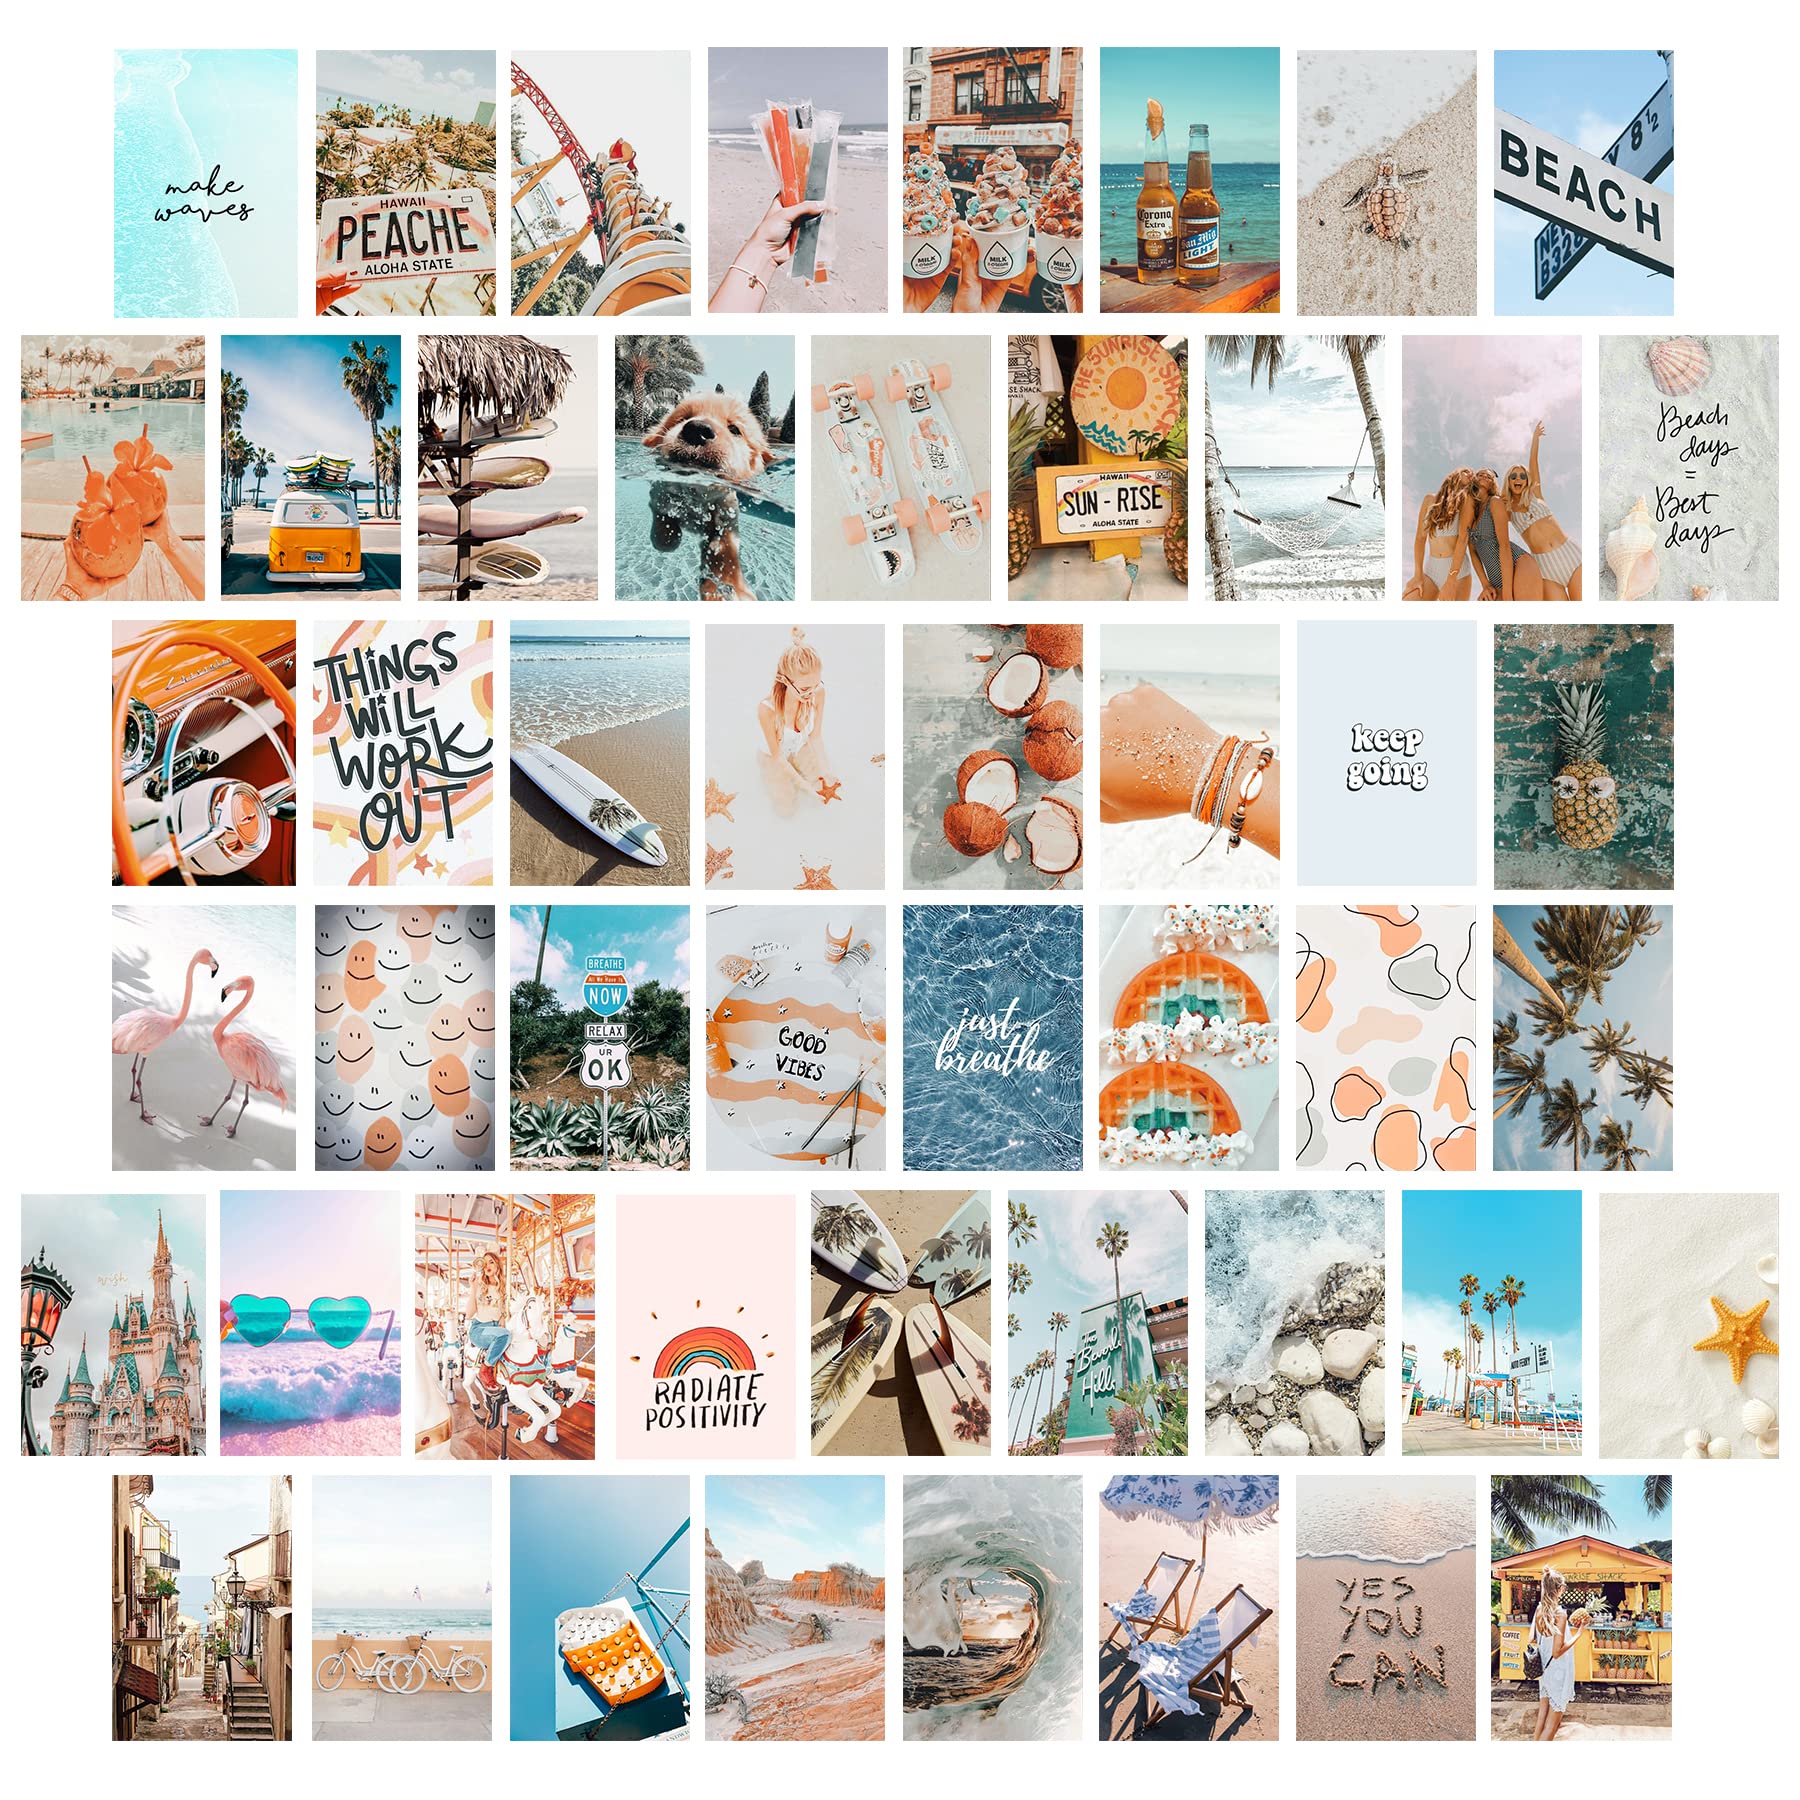 KOSKIMER Beach Wall Collage Kit Aesthetic Picture, 50 Set 4x6 Inch, Beachy Room Decor Aesthetic, Cute Bedroom Decor for Teen Girls, VSCO Room Decor Posters, Photo Collage Kit for Dorm, Preppy